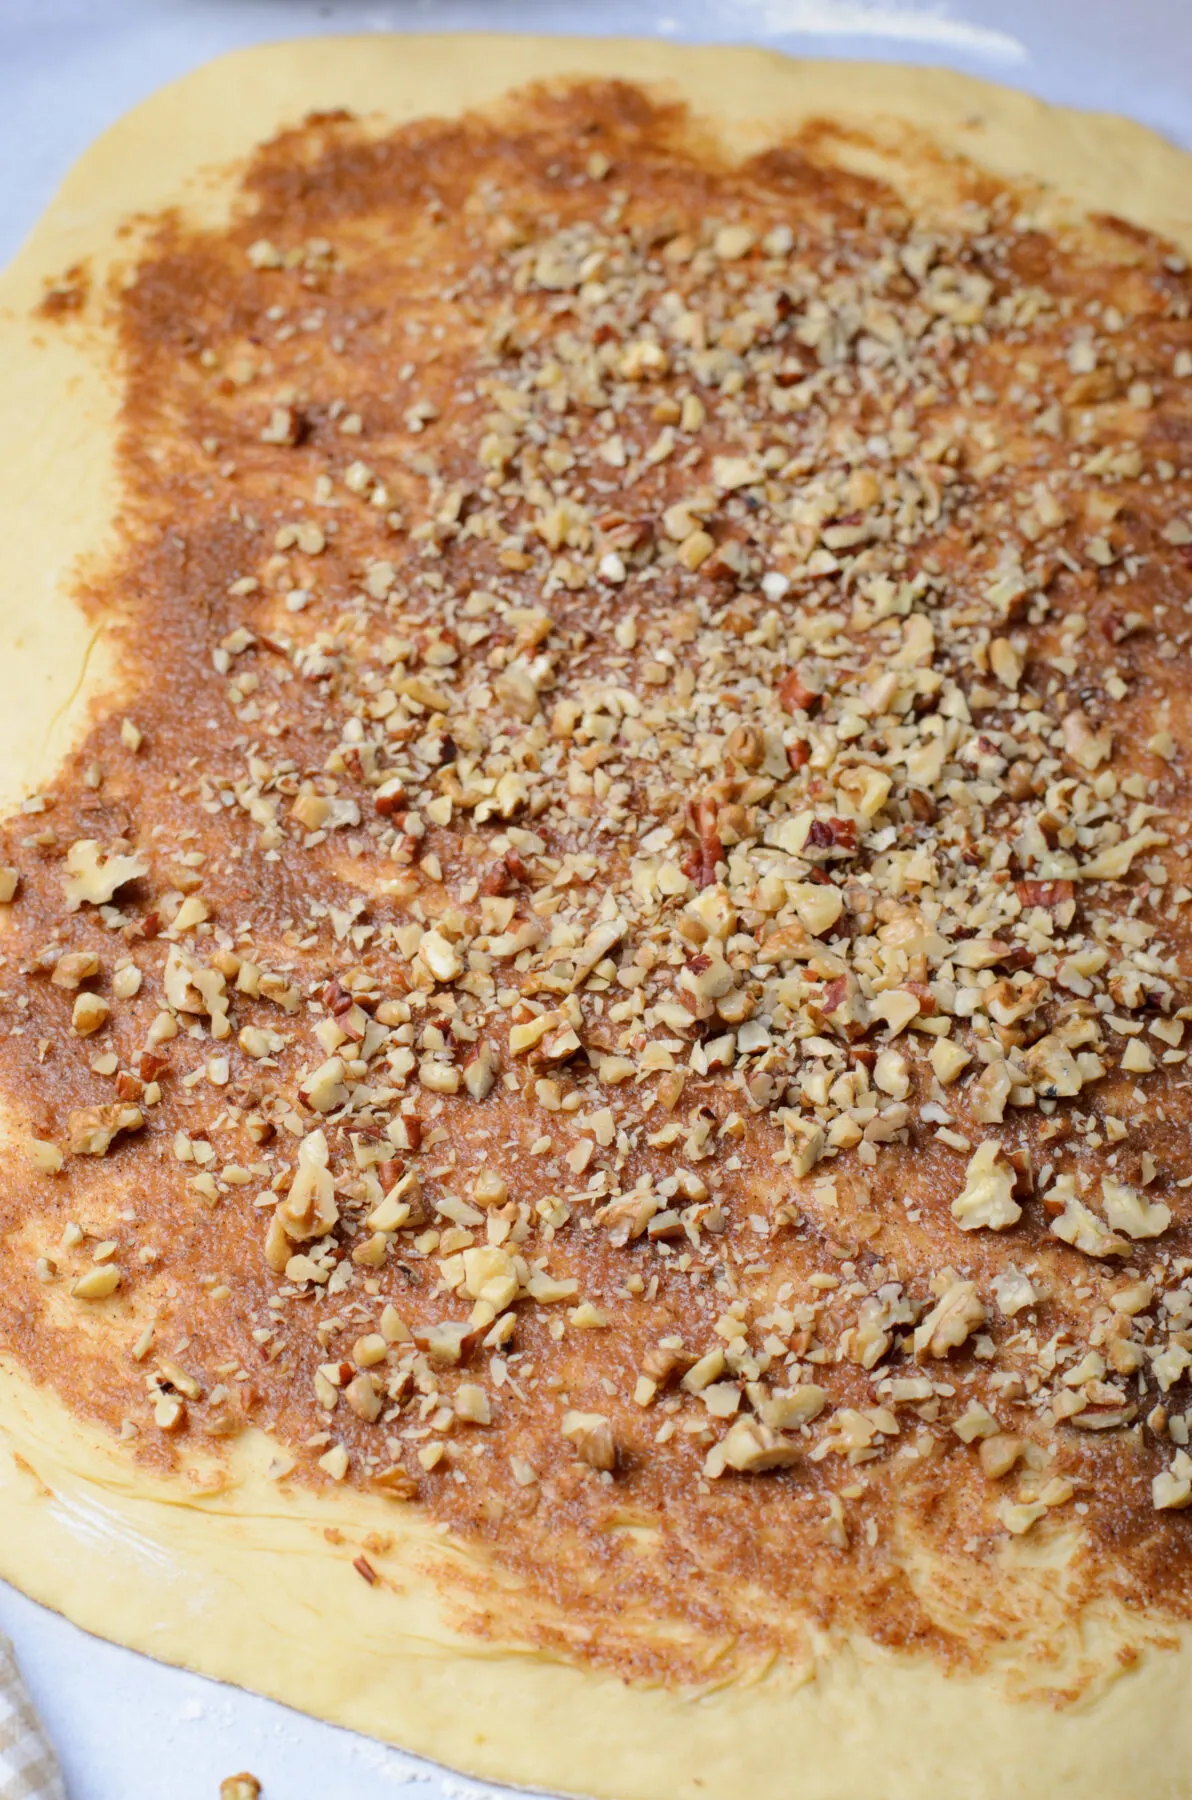 pecans sprinkled out over the dough.